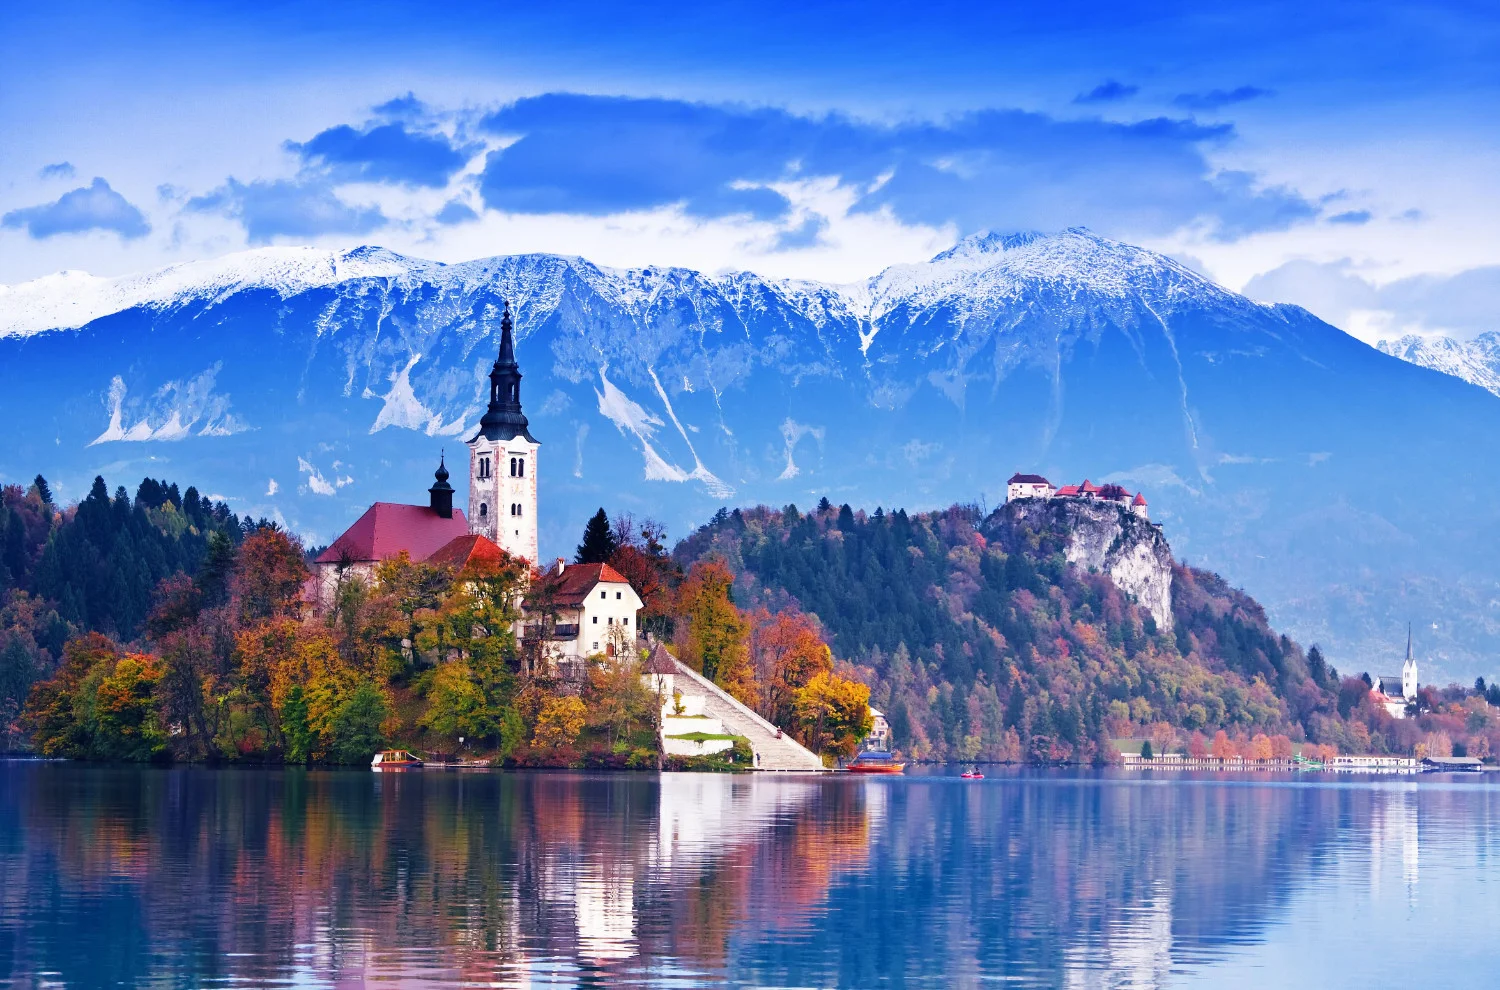 Within 20 kilometres of the A1 motorway, you can reach captivating attractions, such as Postojna Cave, Predjama Castle, and the natural wonder of Lake Bled.